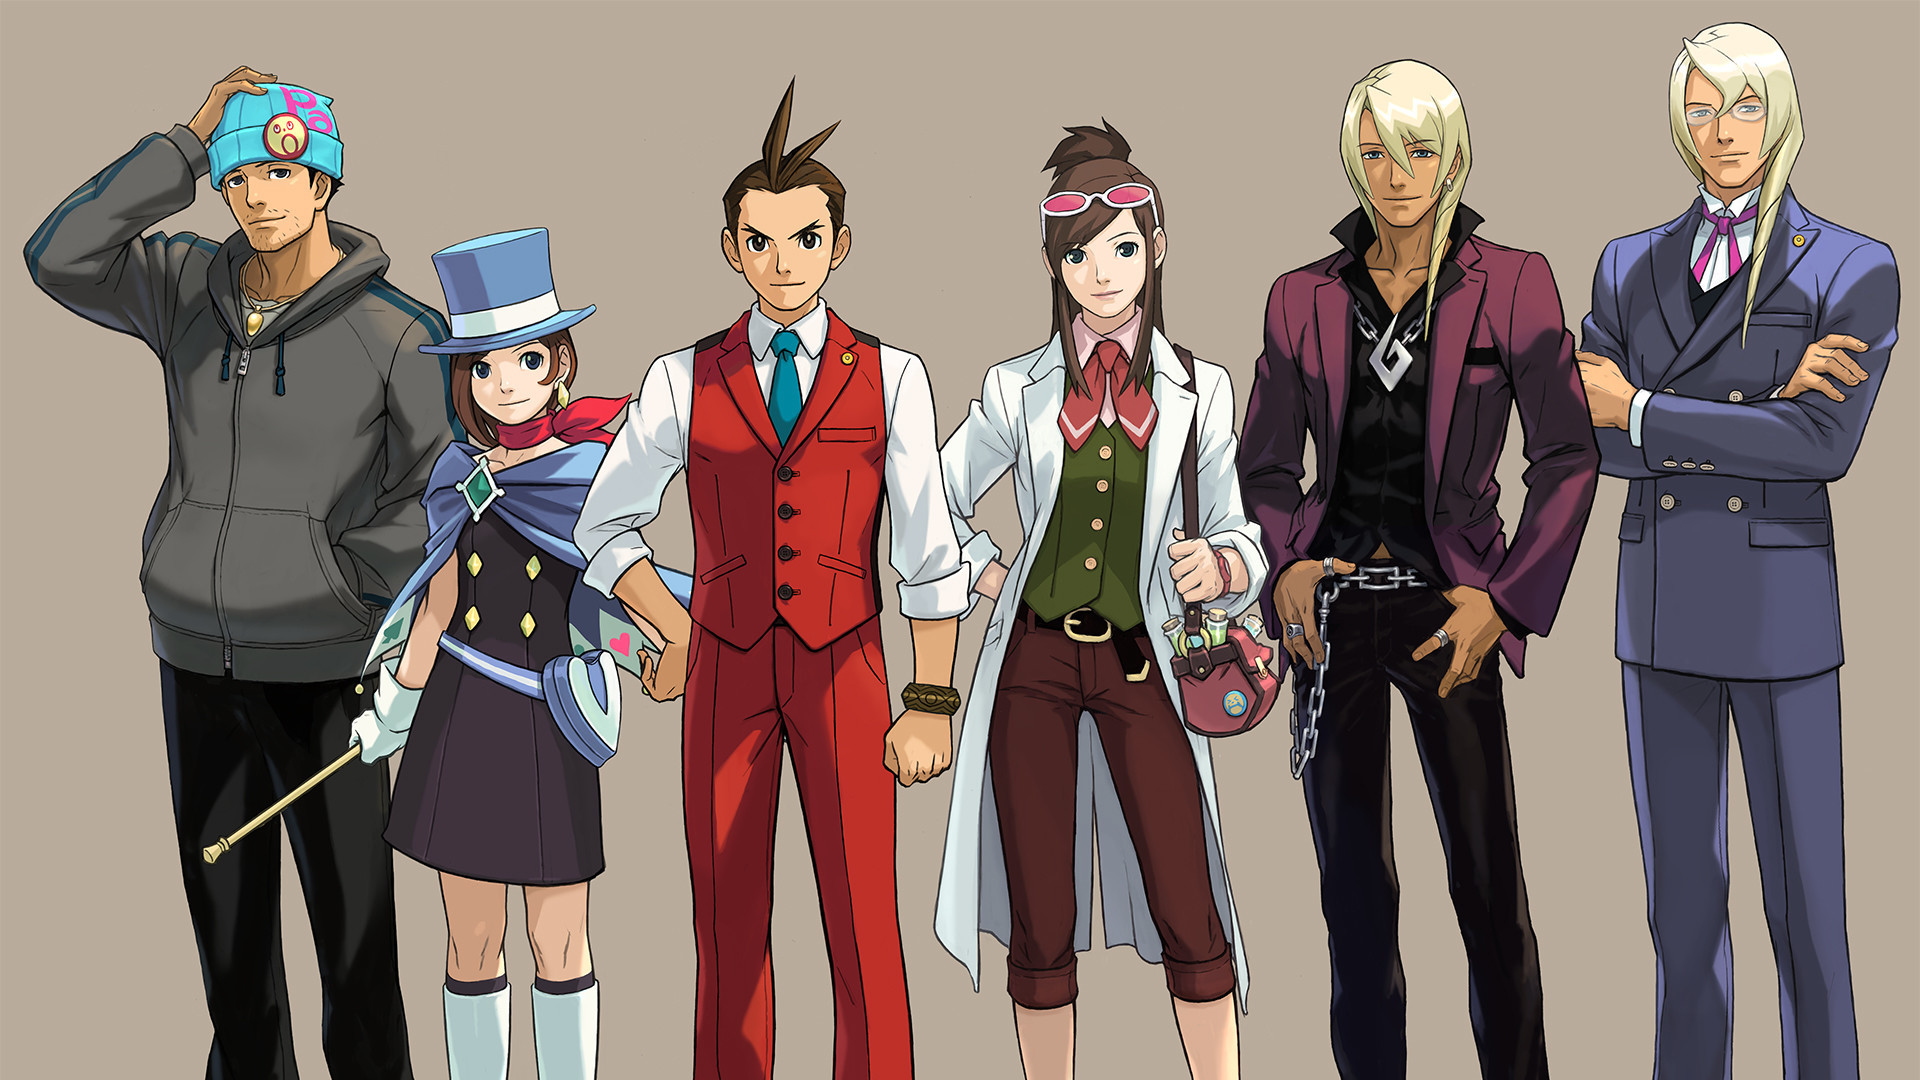 download apollo justice ace attorney switch